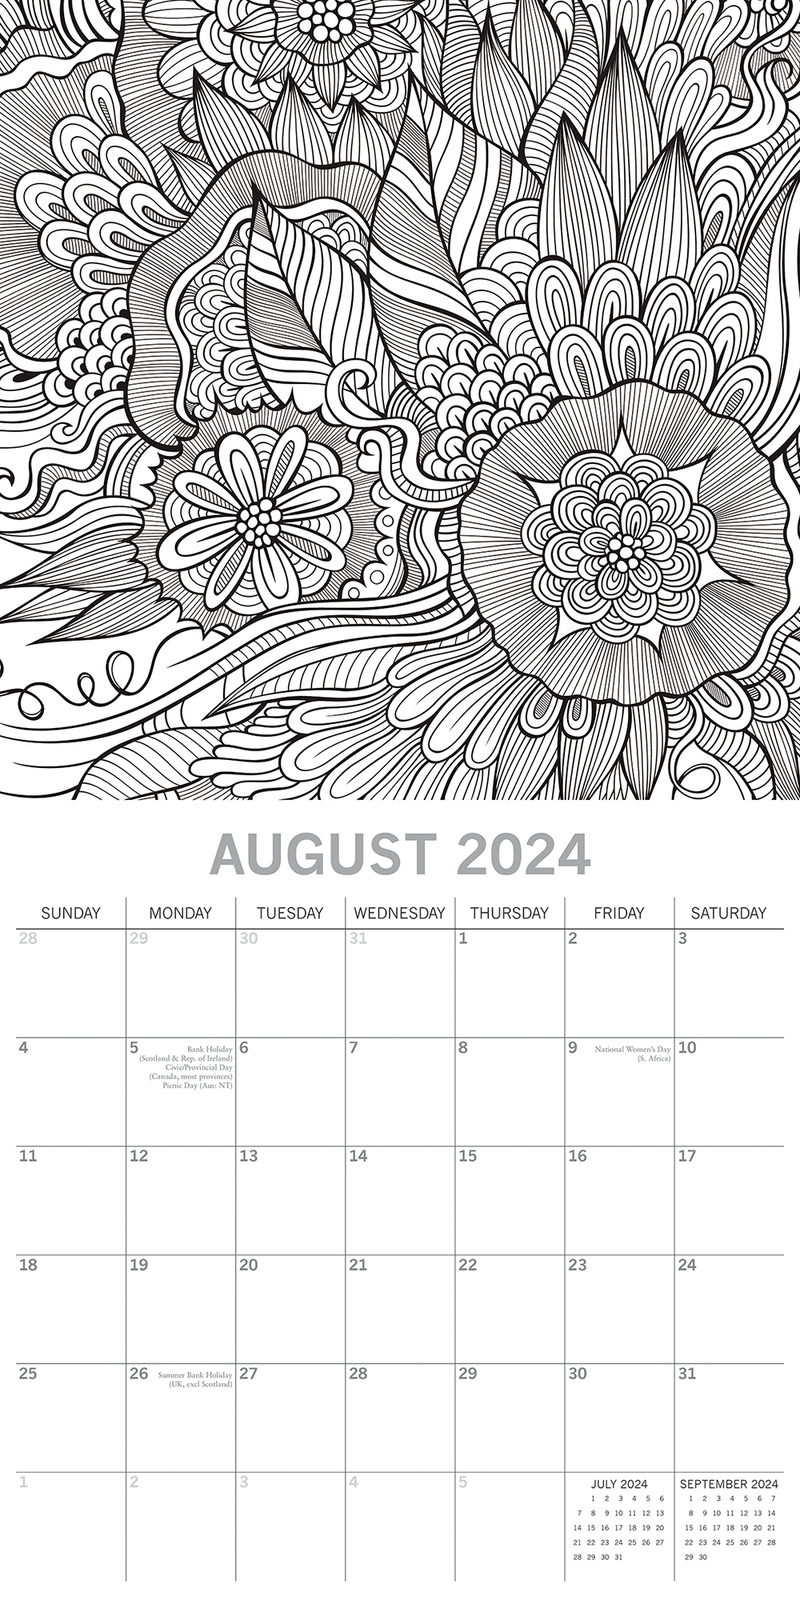 2024 Calendar Colouring Calendar Square Wall by The Gifted Stationery